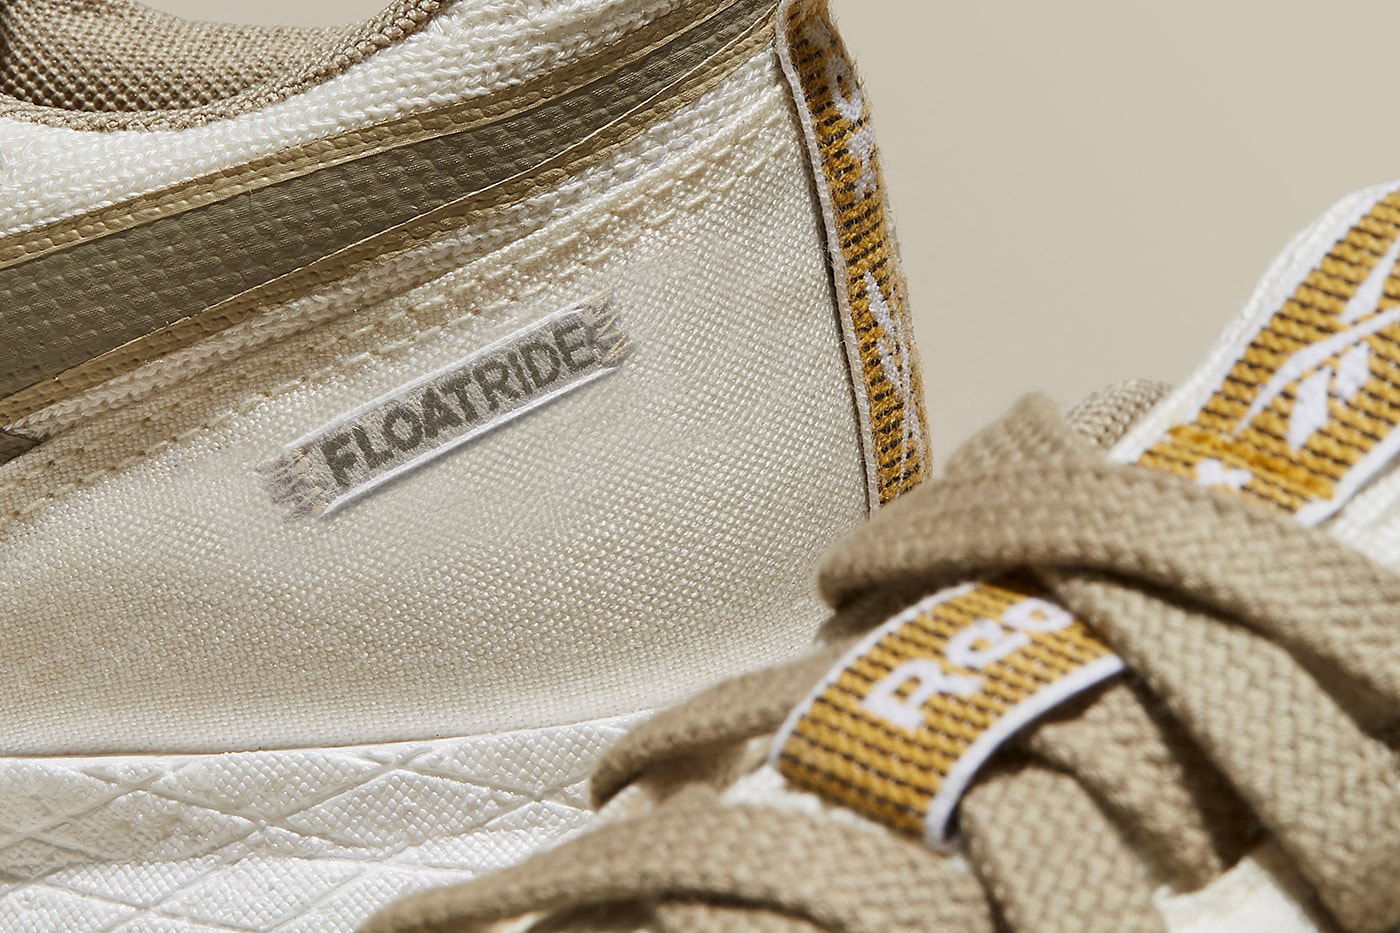 Reebok Forever Floatride Grow Unveil Release First Look Info Beige off white gum rubber sustainability environment [REE]GROW [REE]CYCLED Sekisui Corporation